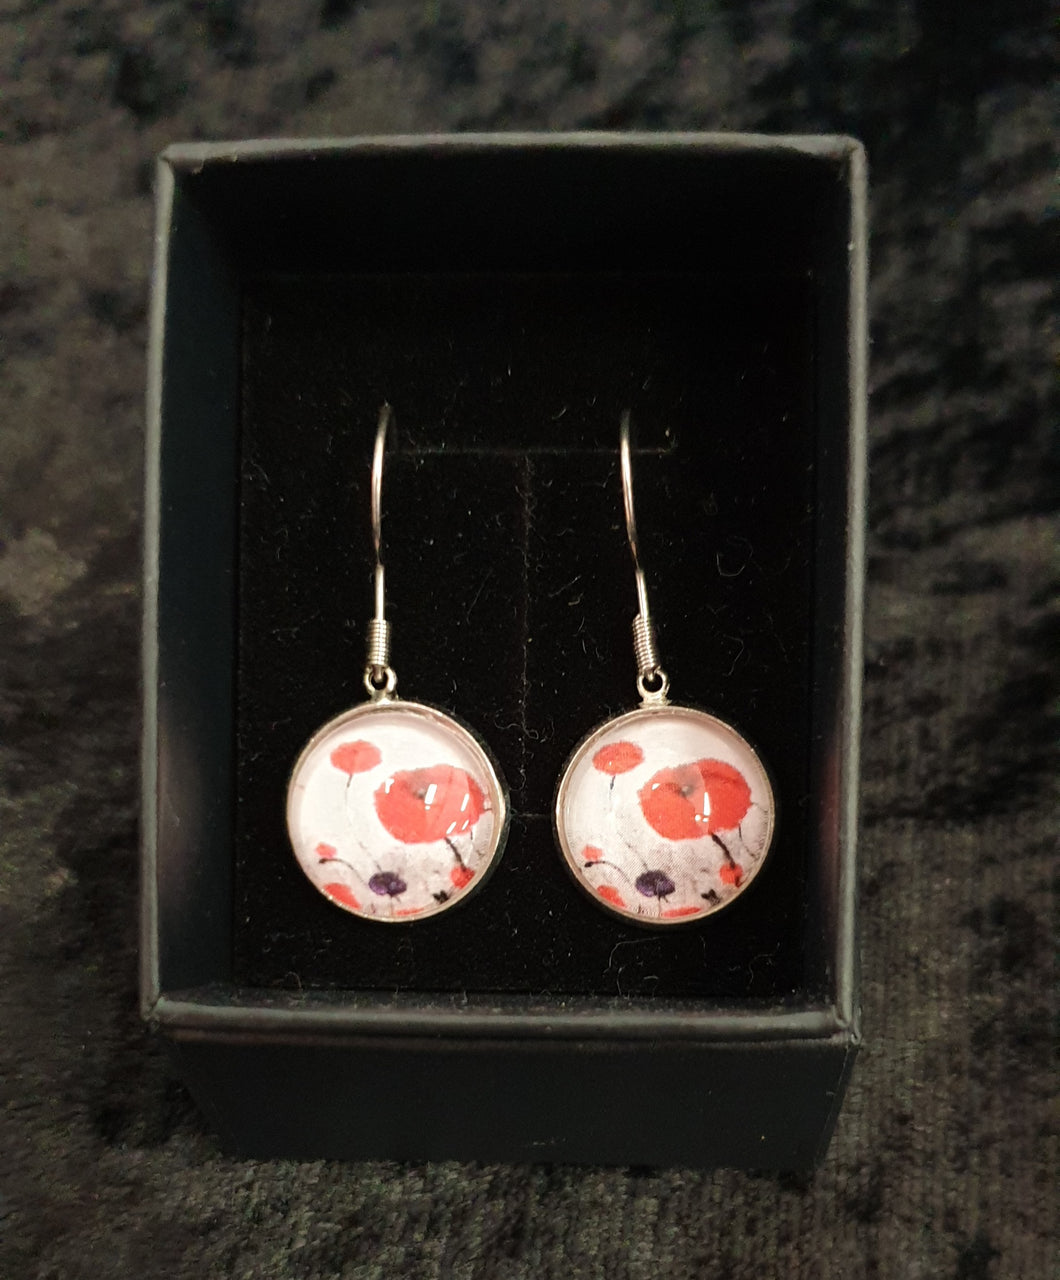 Original painting of red poppies with an abstract background on surgical steel 14mm round fishhook earrings